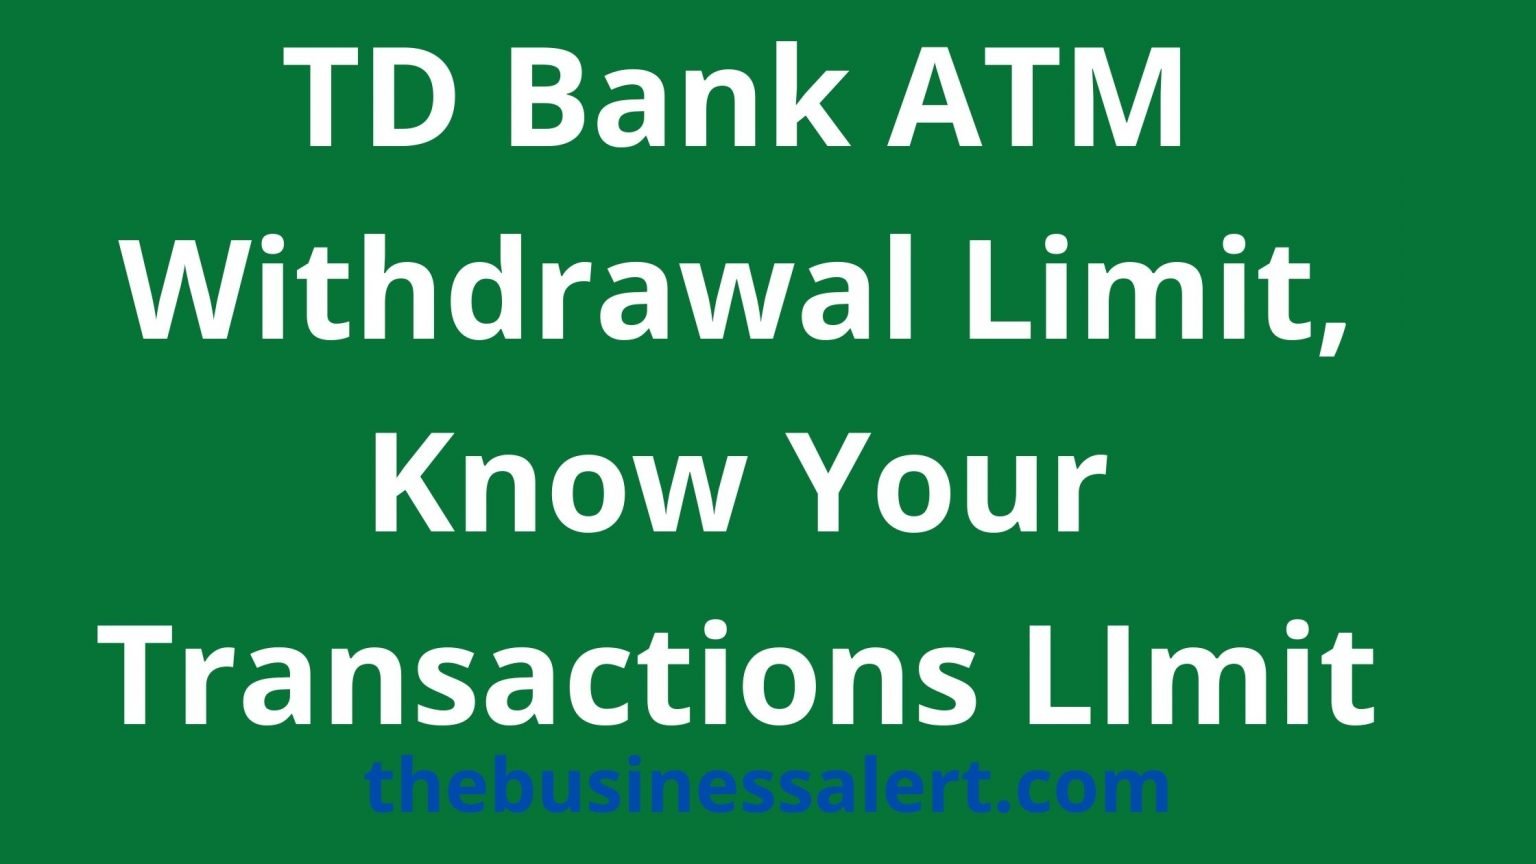 TD Bank ATM Withdrawal Limit, Know Your Transactions LImit The